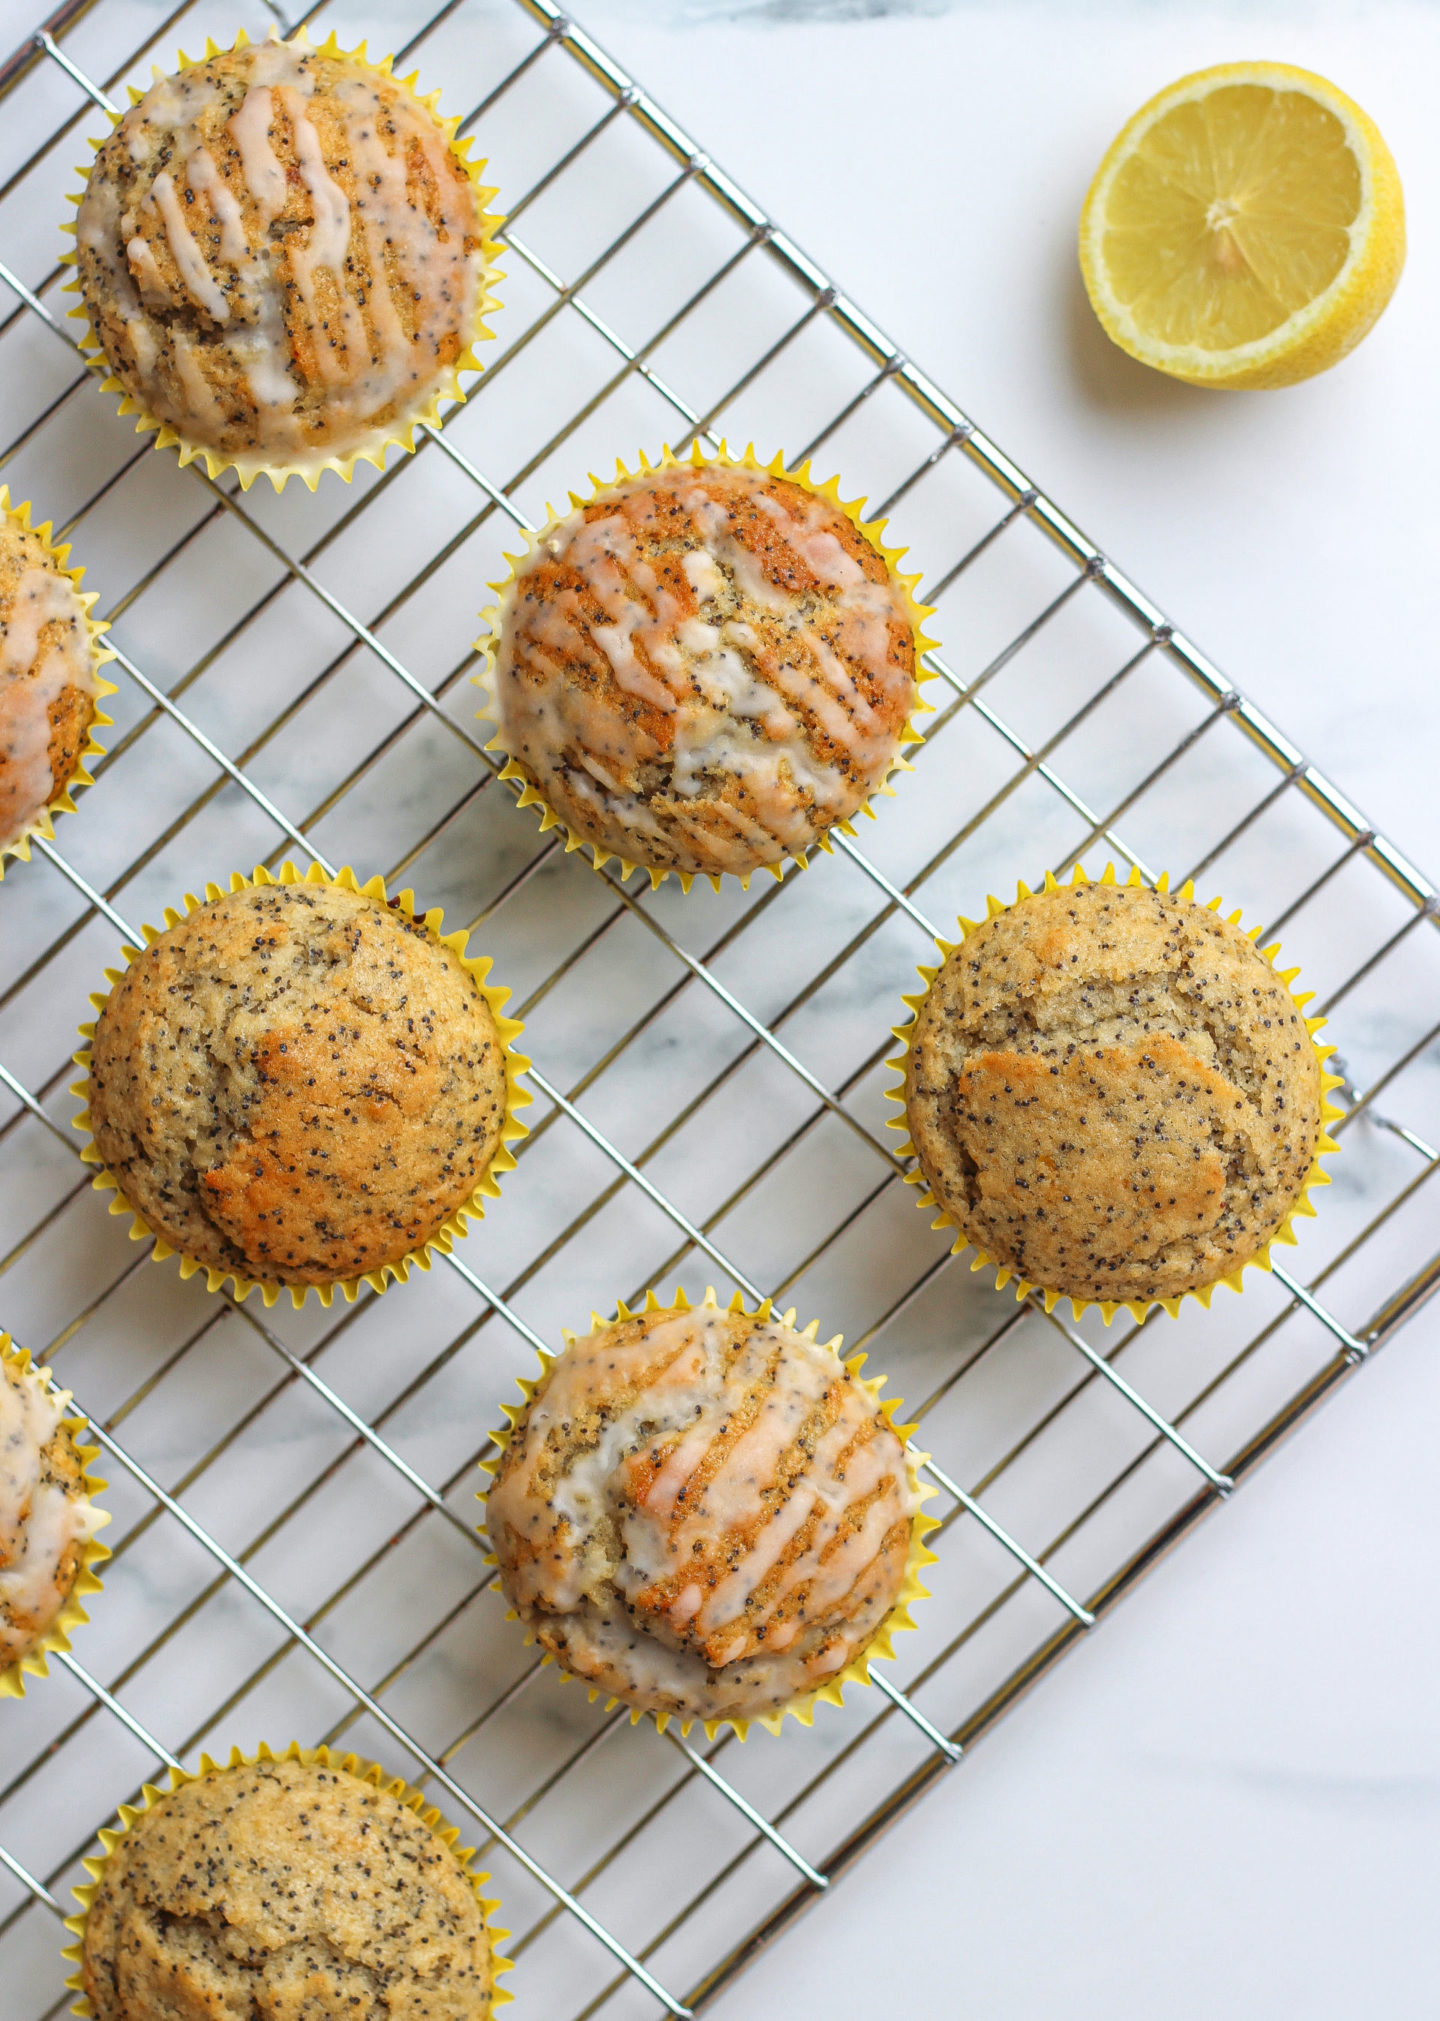 view from above of several lemon poppy seed muffins on wire rack